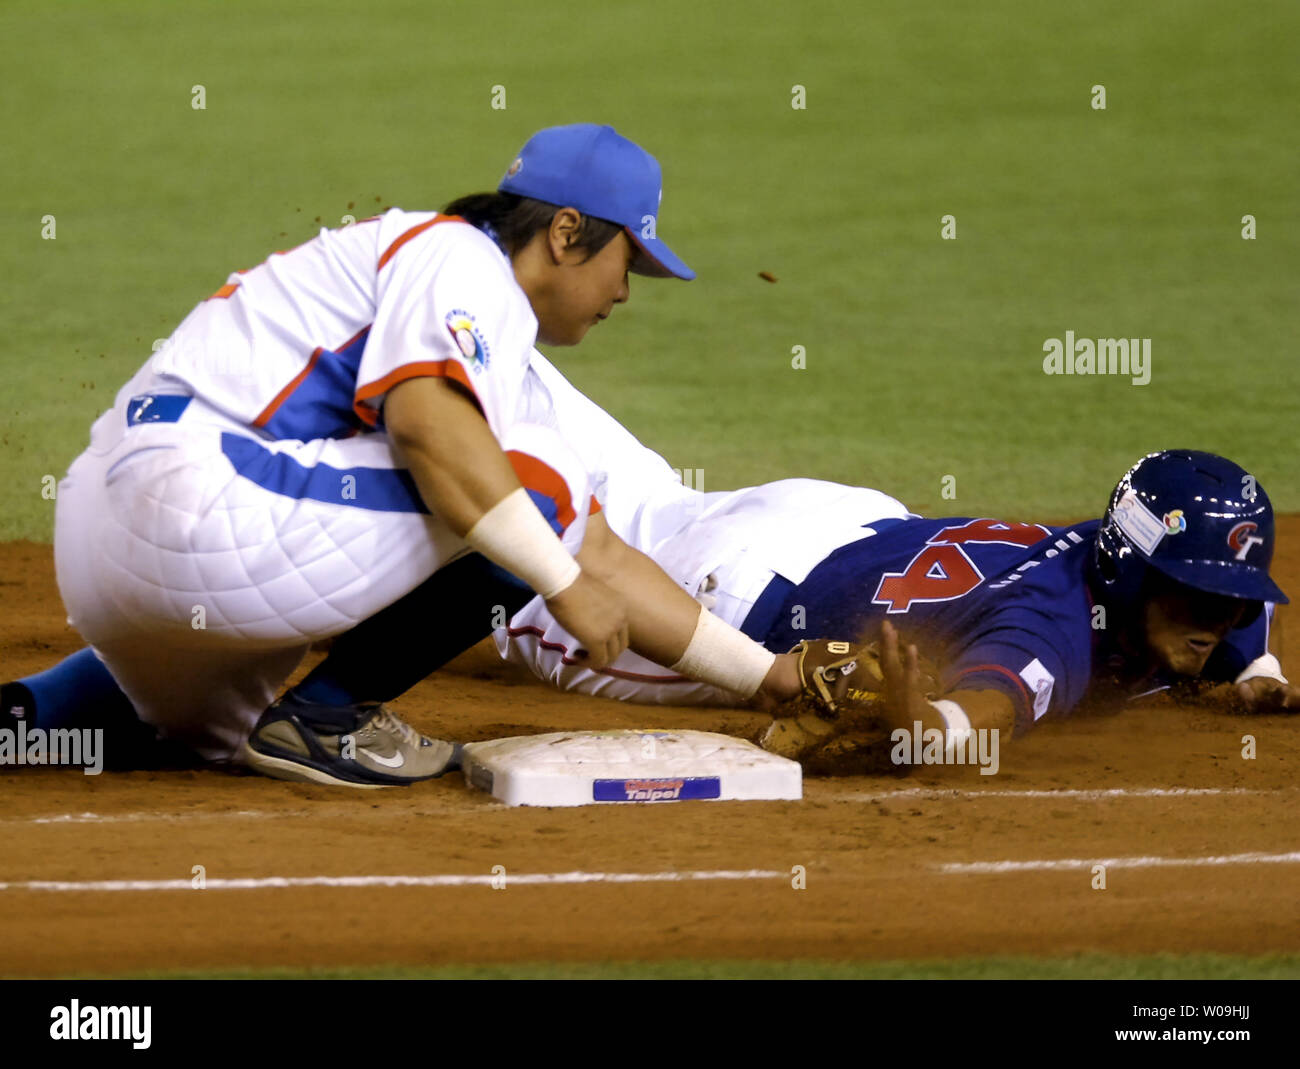 Chinese Taipei center fielder Che-hsuan Lin is picked off in the fourth inning against Korea during the first round of the World Baseball Classic in Tokyo on March 6, 2009. (UPI photo/Keizo Mori) Stock Photo